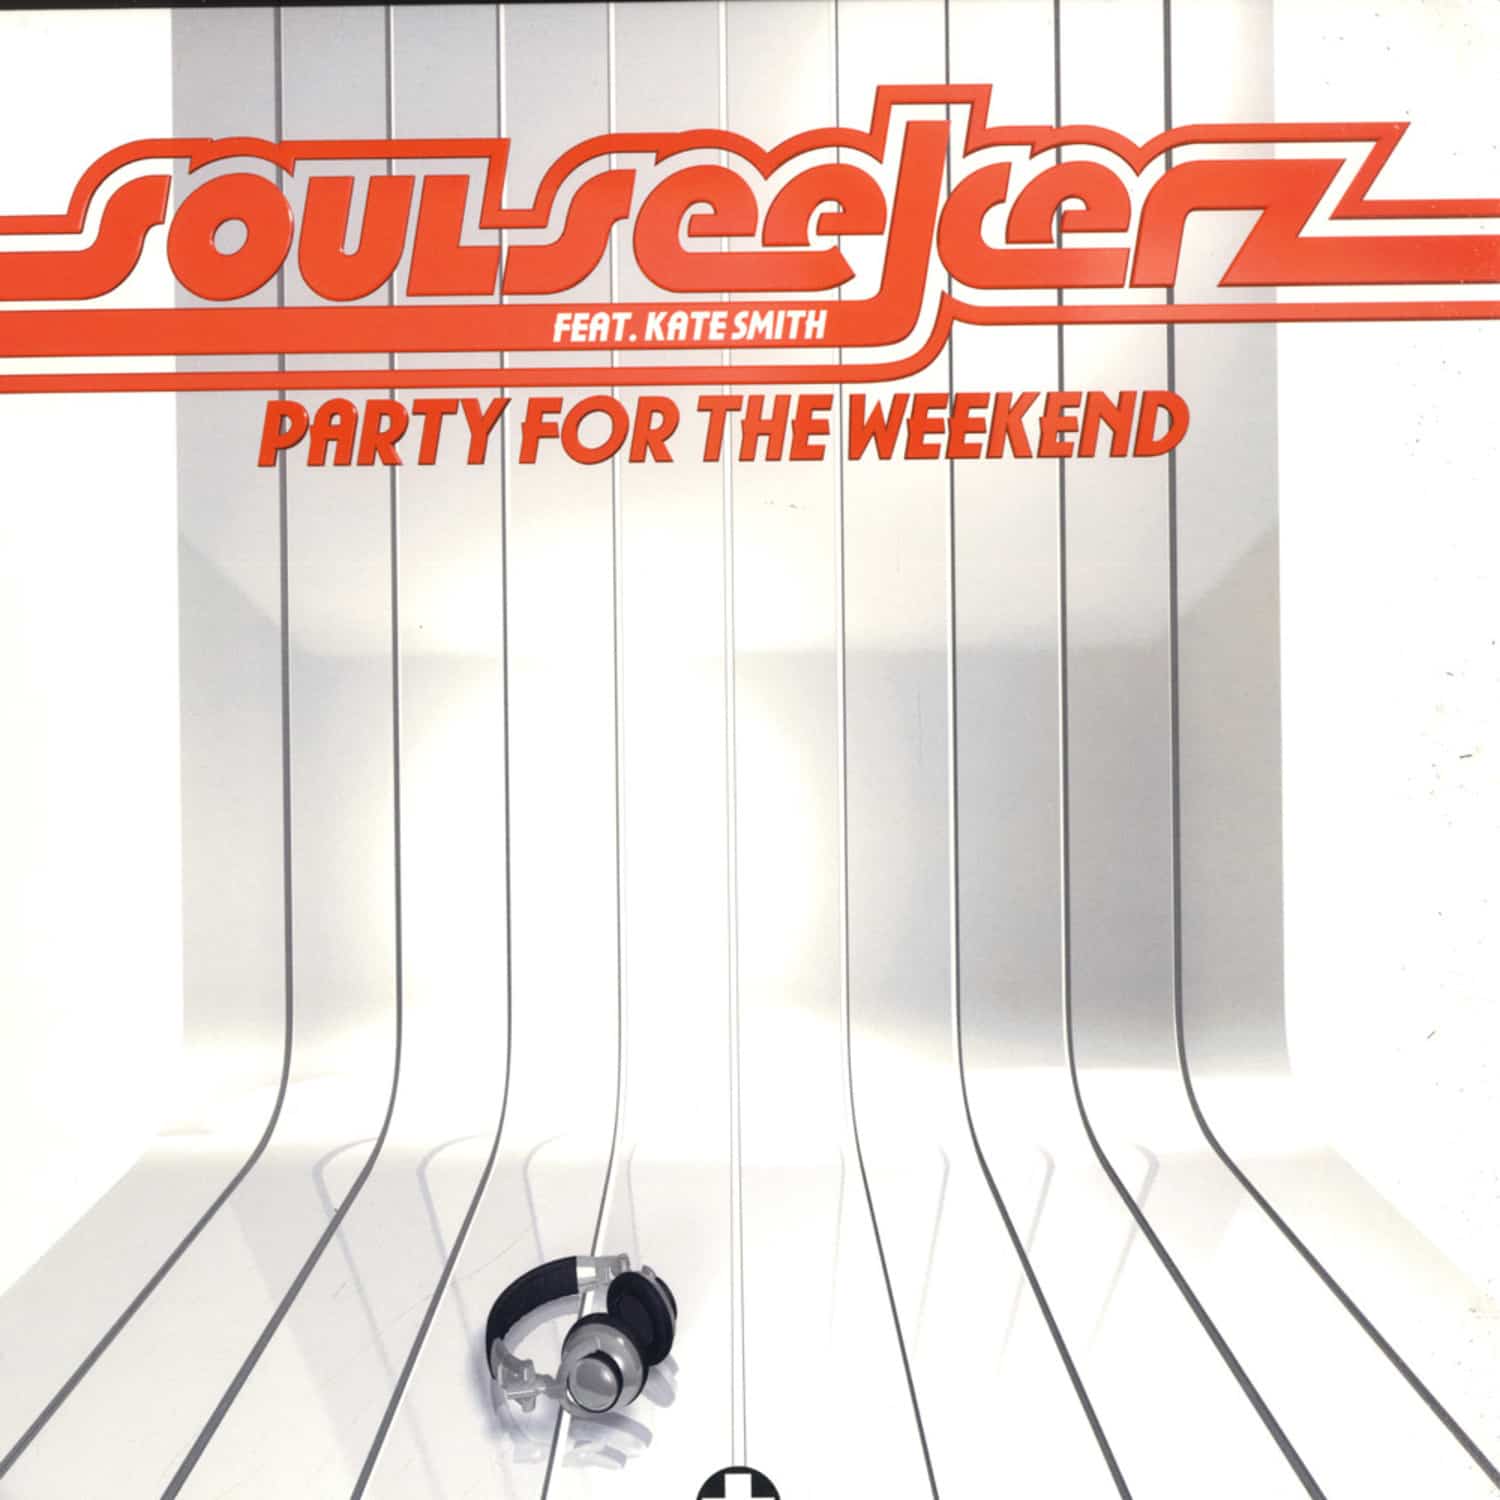 Soul Seekerz - PARTY FOR THE WEEKEND 2007